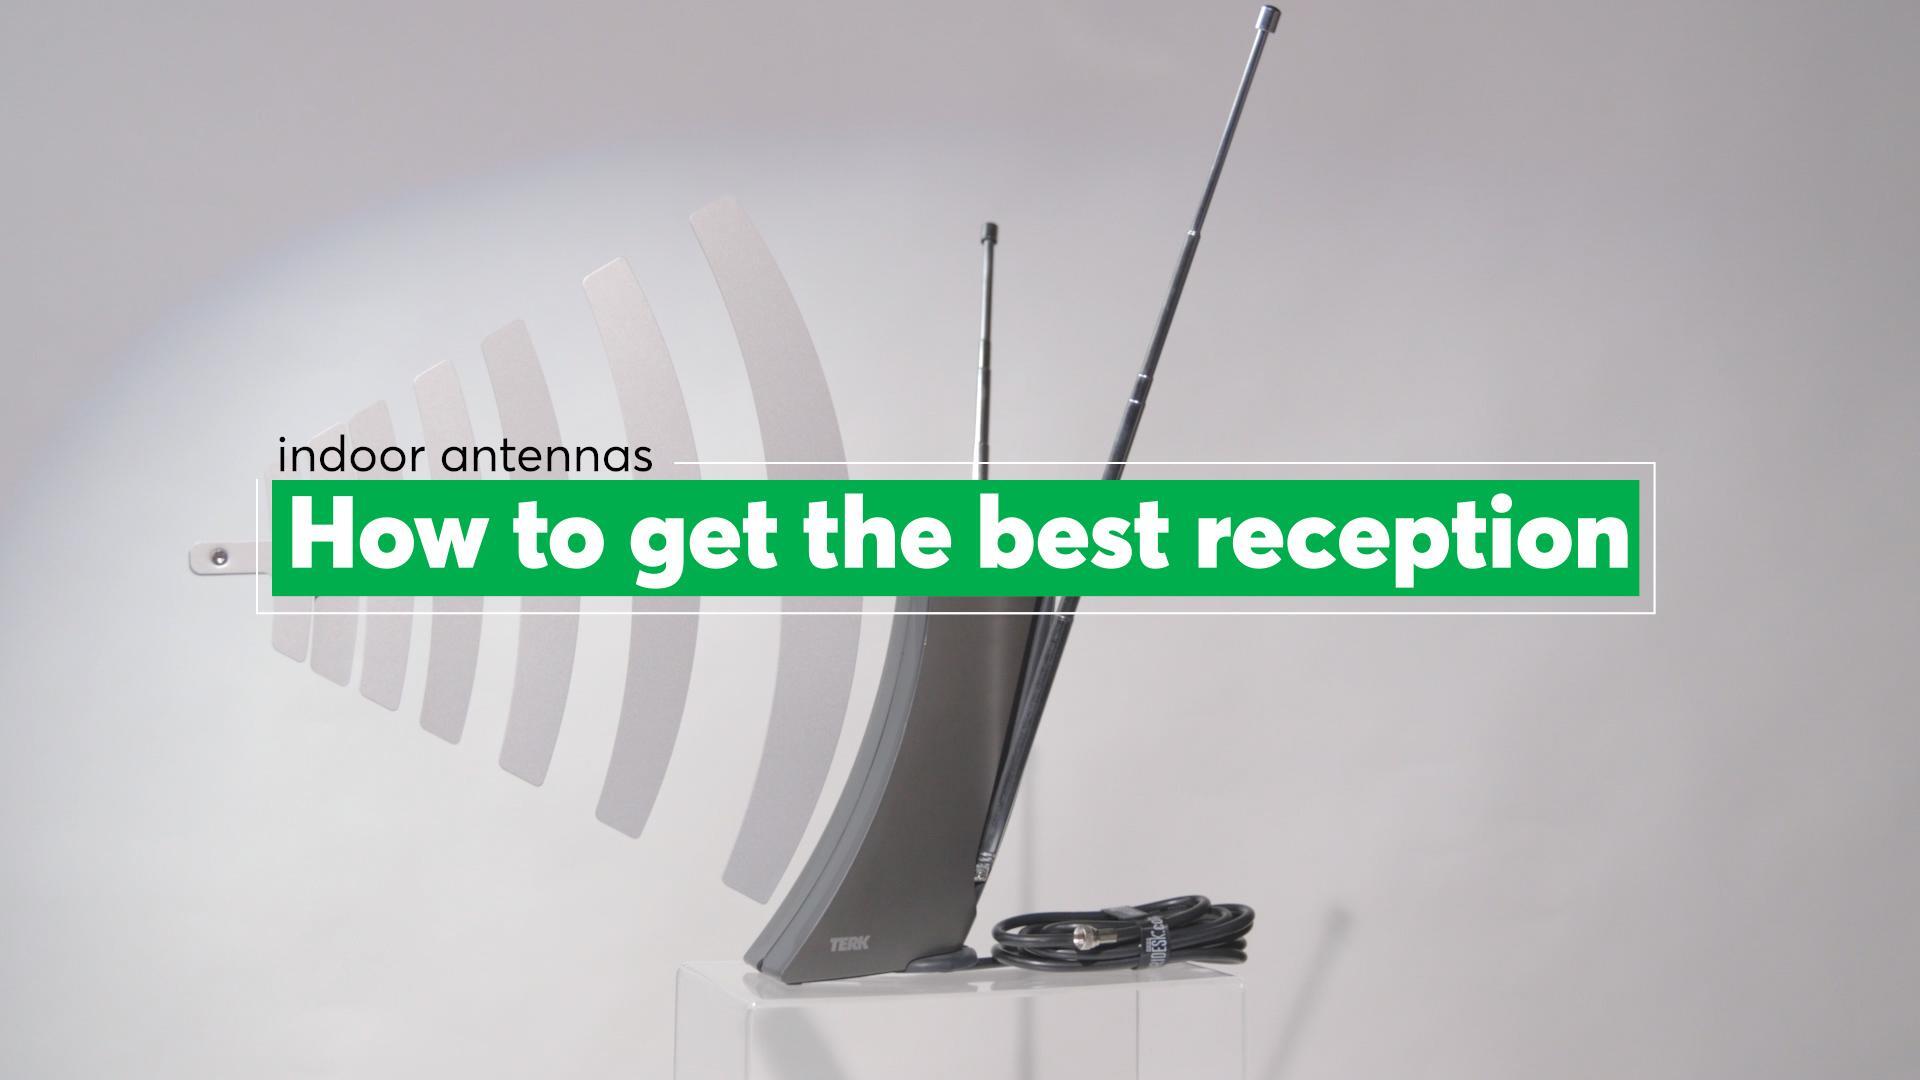 TV BOOST ANTENNA REVIEWS (UPDATED): WHY BUY TV BOOSTER ANTENNA?